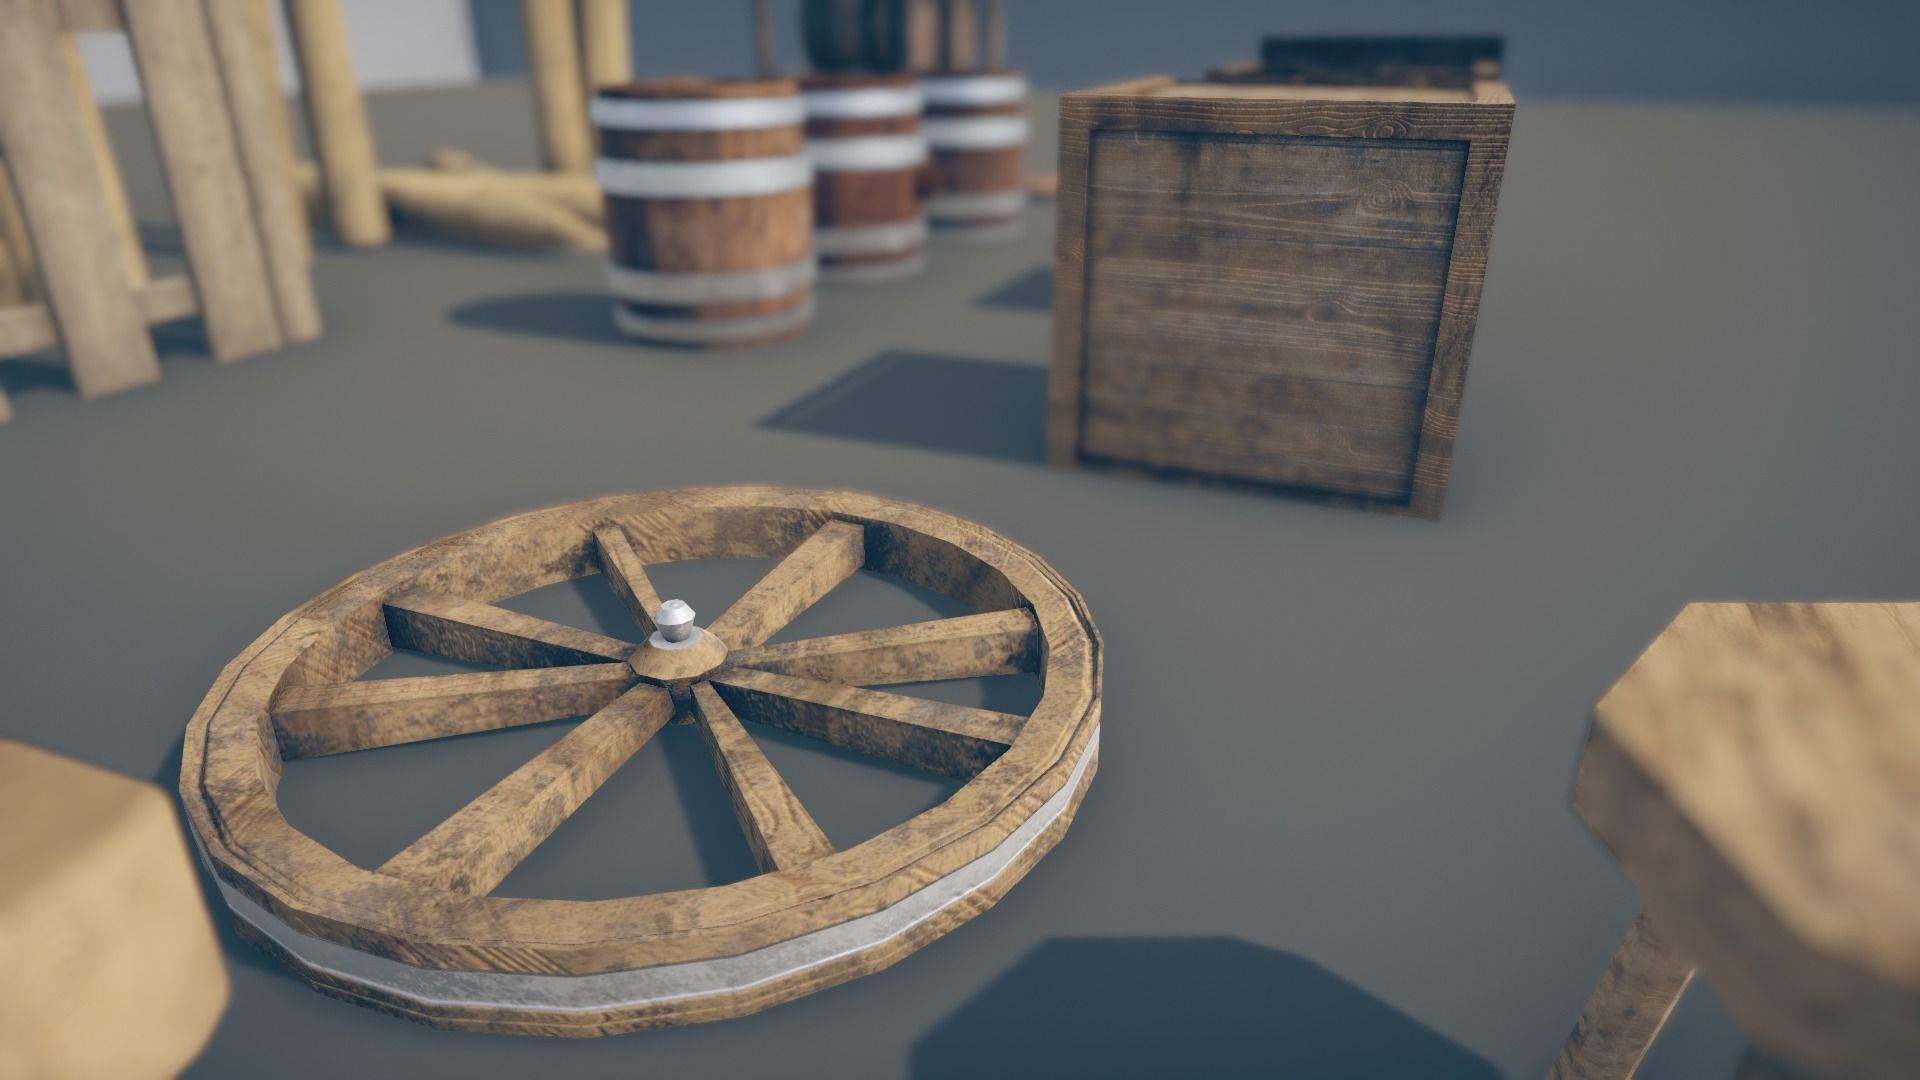 Medieval Asset Pack - Game ready Windmill Build Props Low poly 3D Model Collection